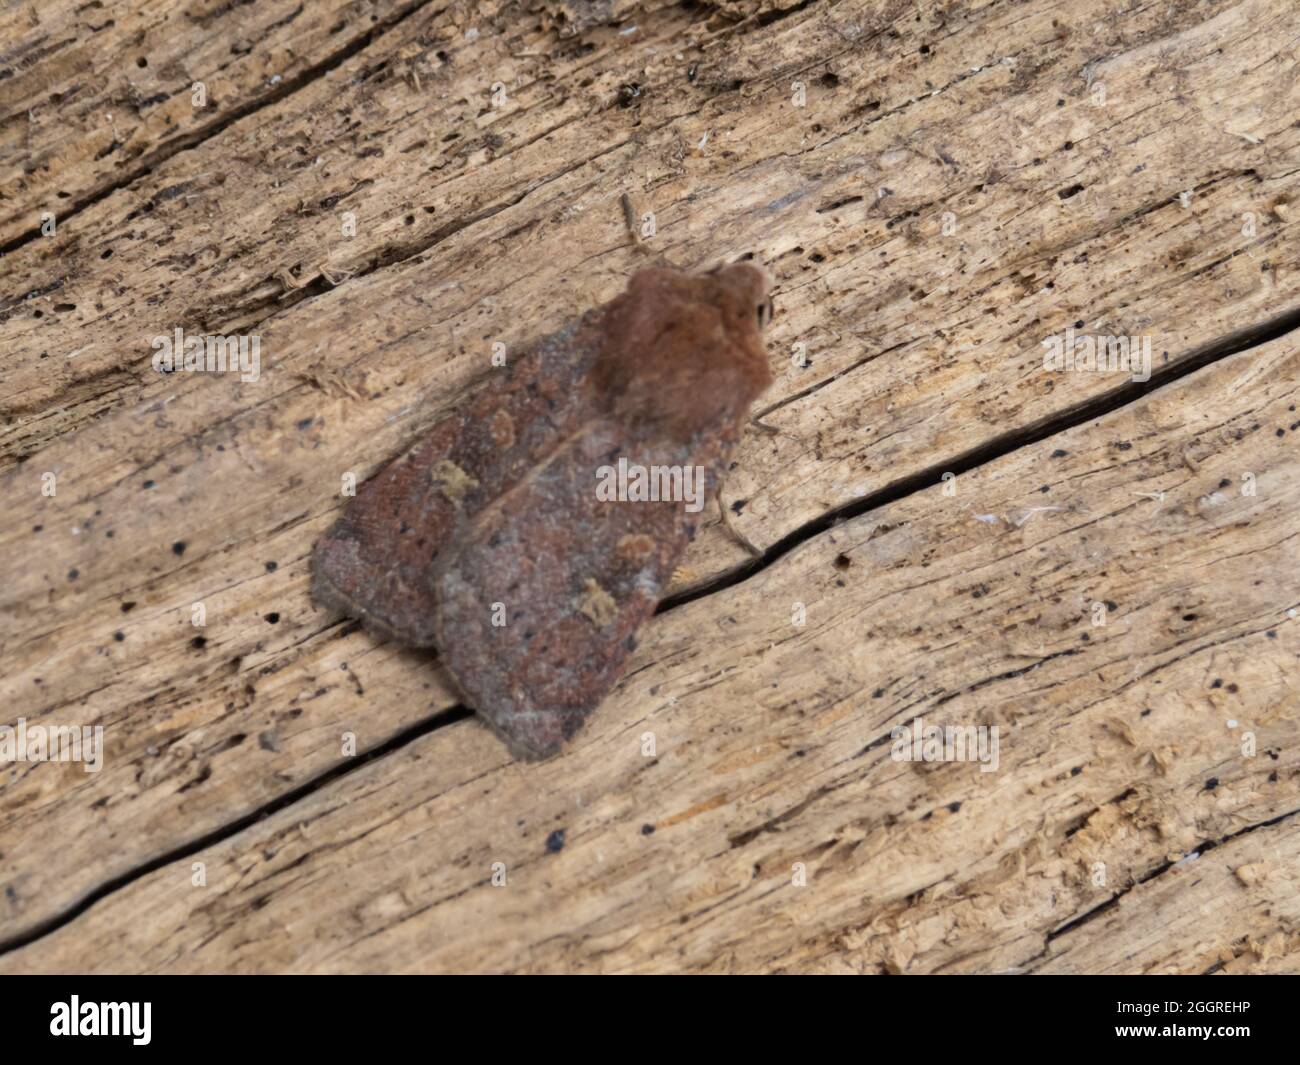 Xestia xanthographa the Square-spot Rustic Moth, perched on a log. Stock Photo